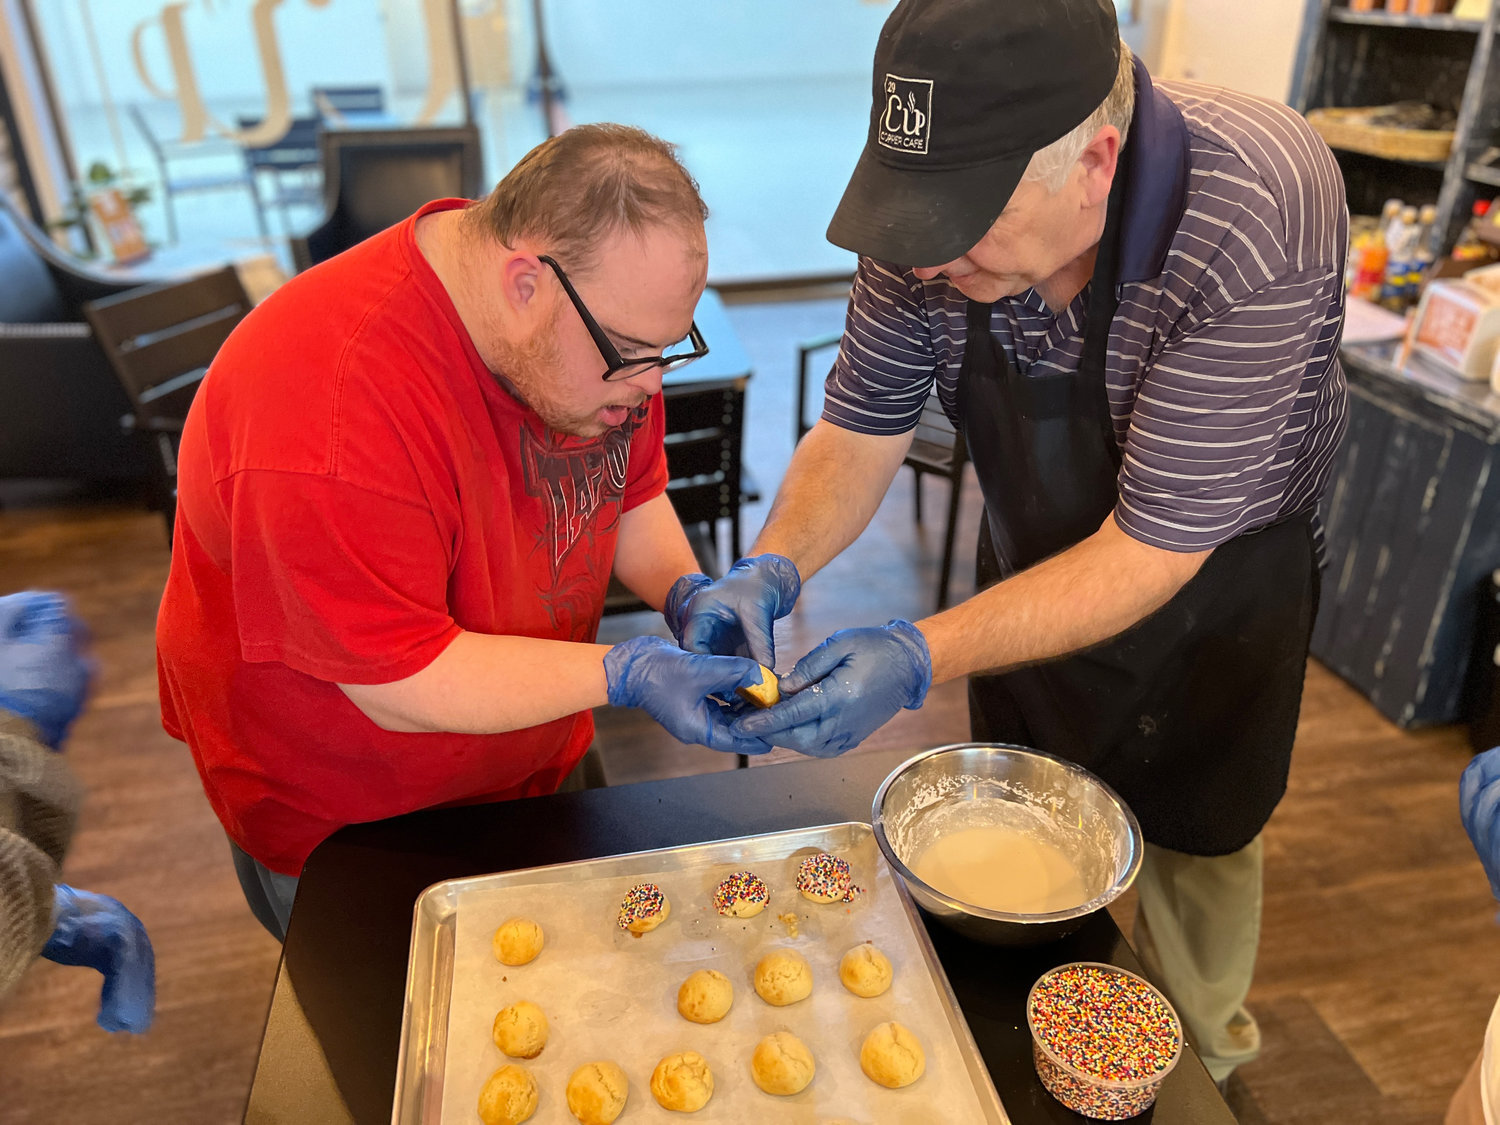 Copper Café Head Chef Eric Kennedy teaches pre-vocational participant James Michael Kent how to frost ricotta cookies in a baking class, sponsored by the Bonacci family recently. The program, in honor of the late Augustina “Gussie” Brindisi, helps individuals with disabilities learn a variety of life and employment skills.